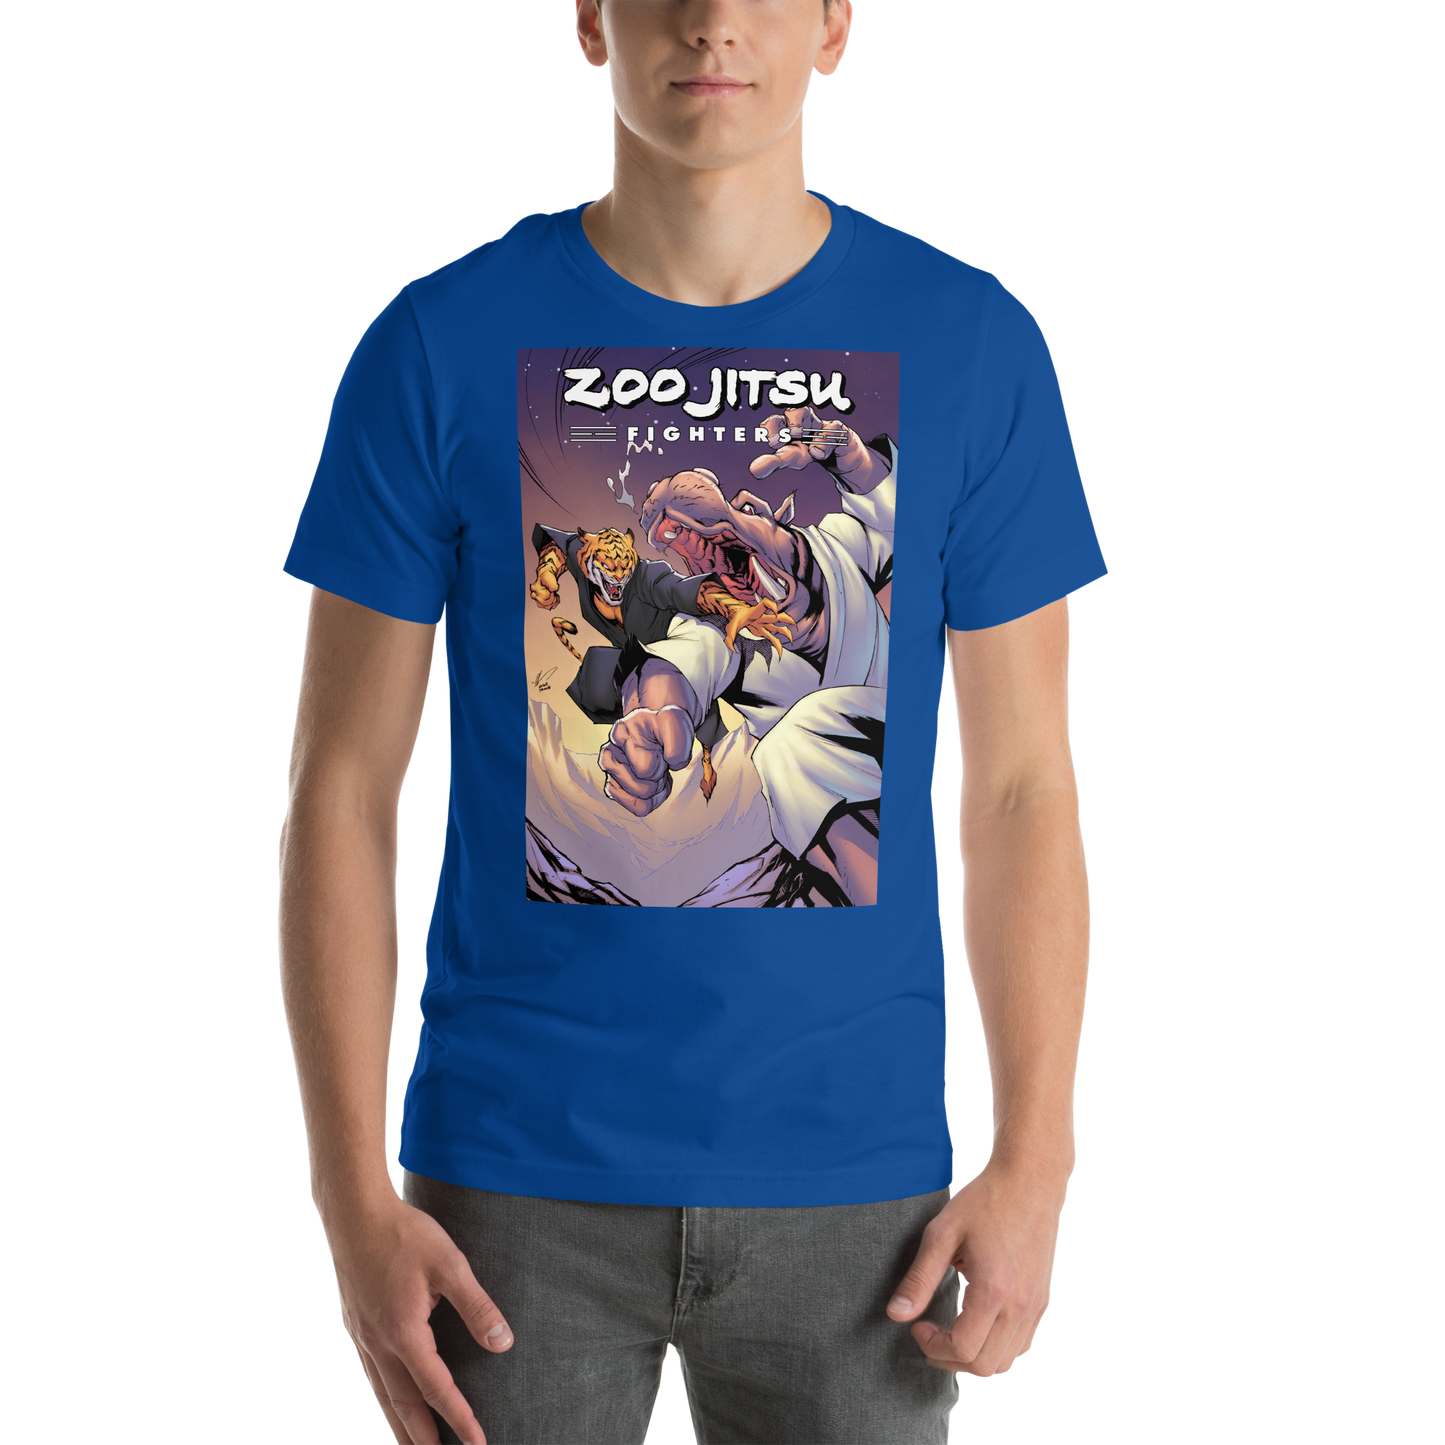 Zoo Jitsu Fighters Unisex t-shirt by Ale Garza - Icon Heroes 